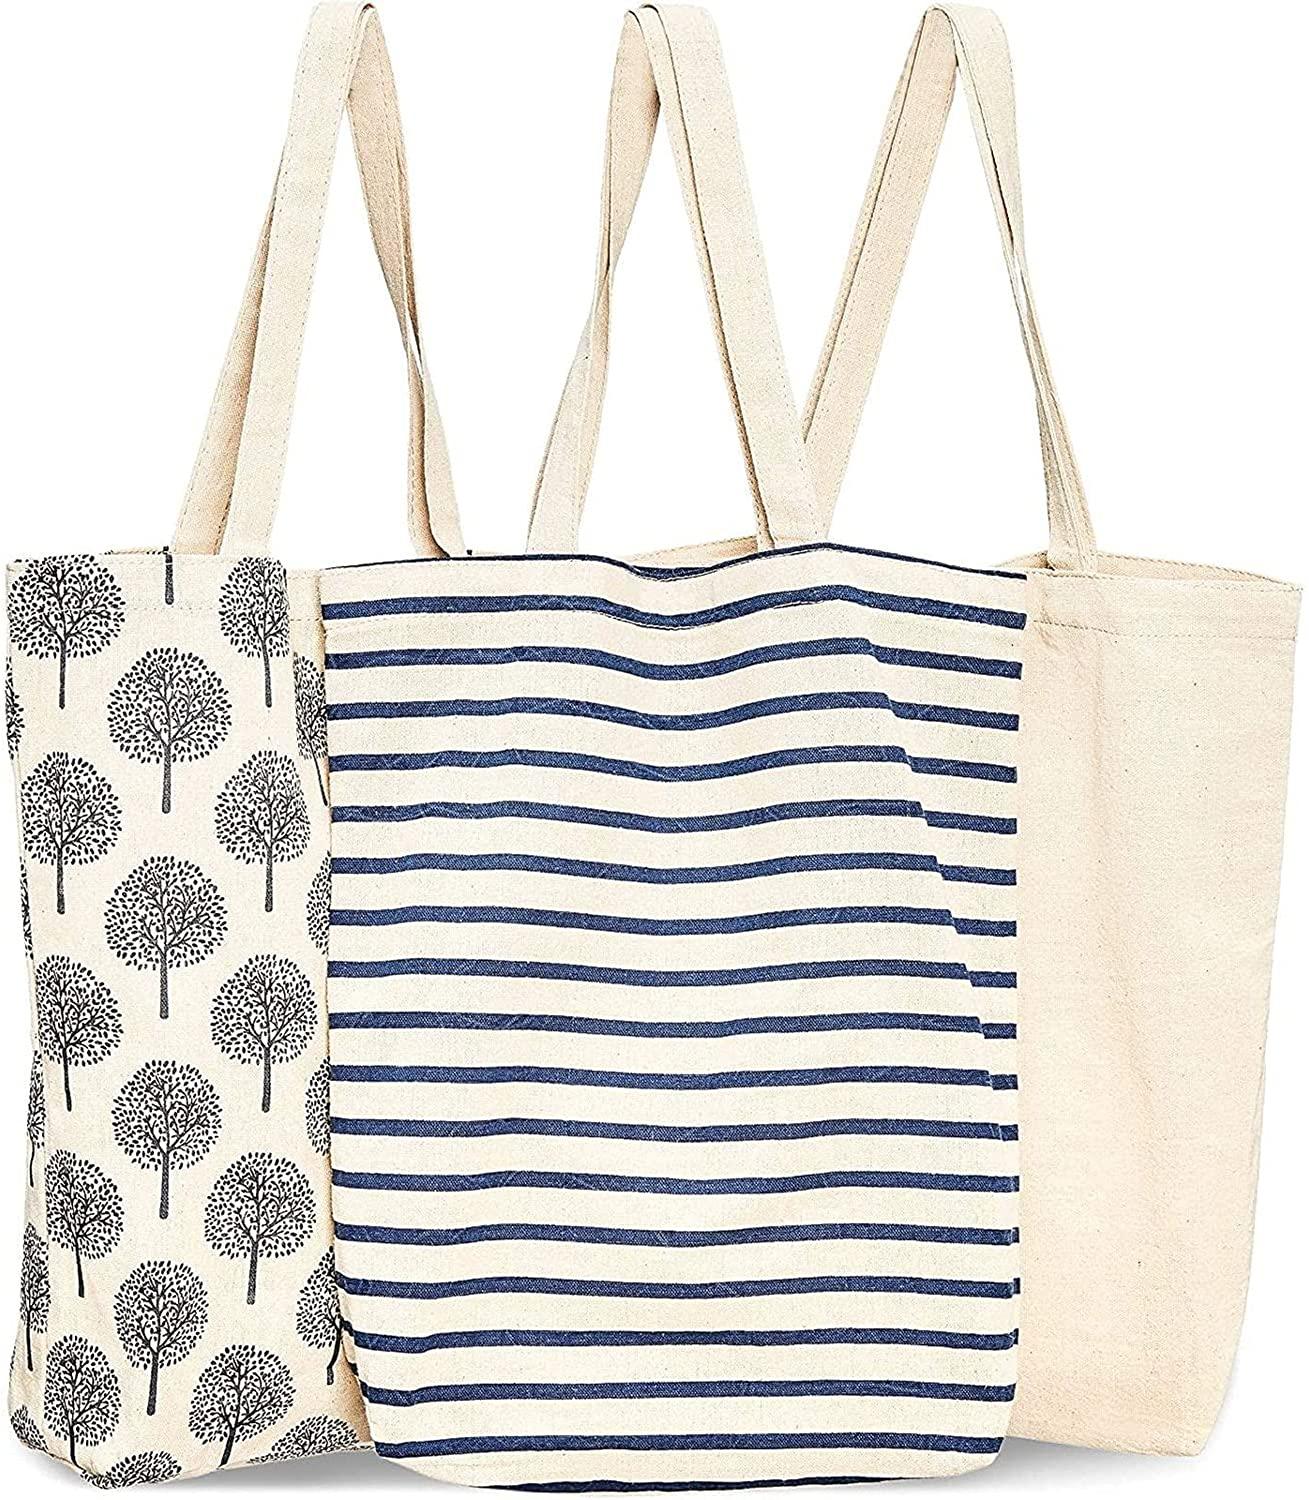 Reusable Tote Bags, Cotton Canvas Cloth for Grocery, Shopping (3 Designs, 15x16.5 inches) - Lasercutwraps Shop